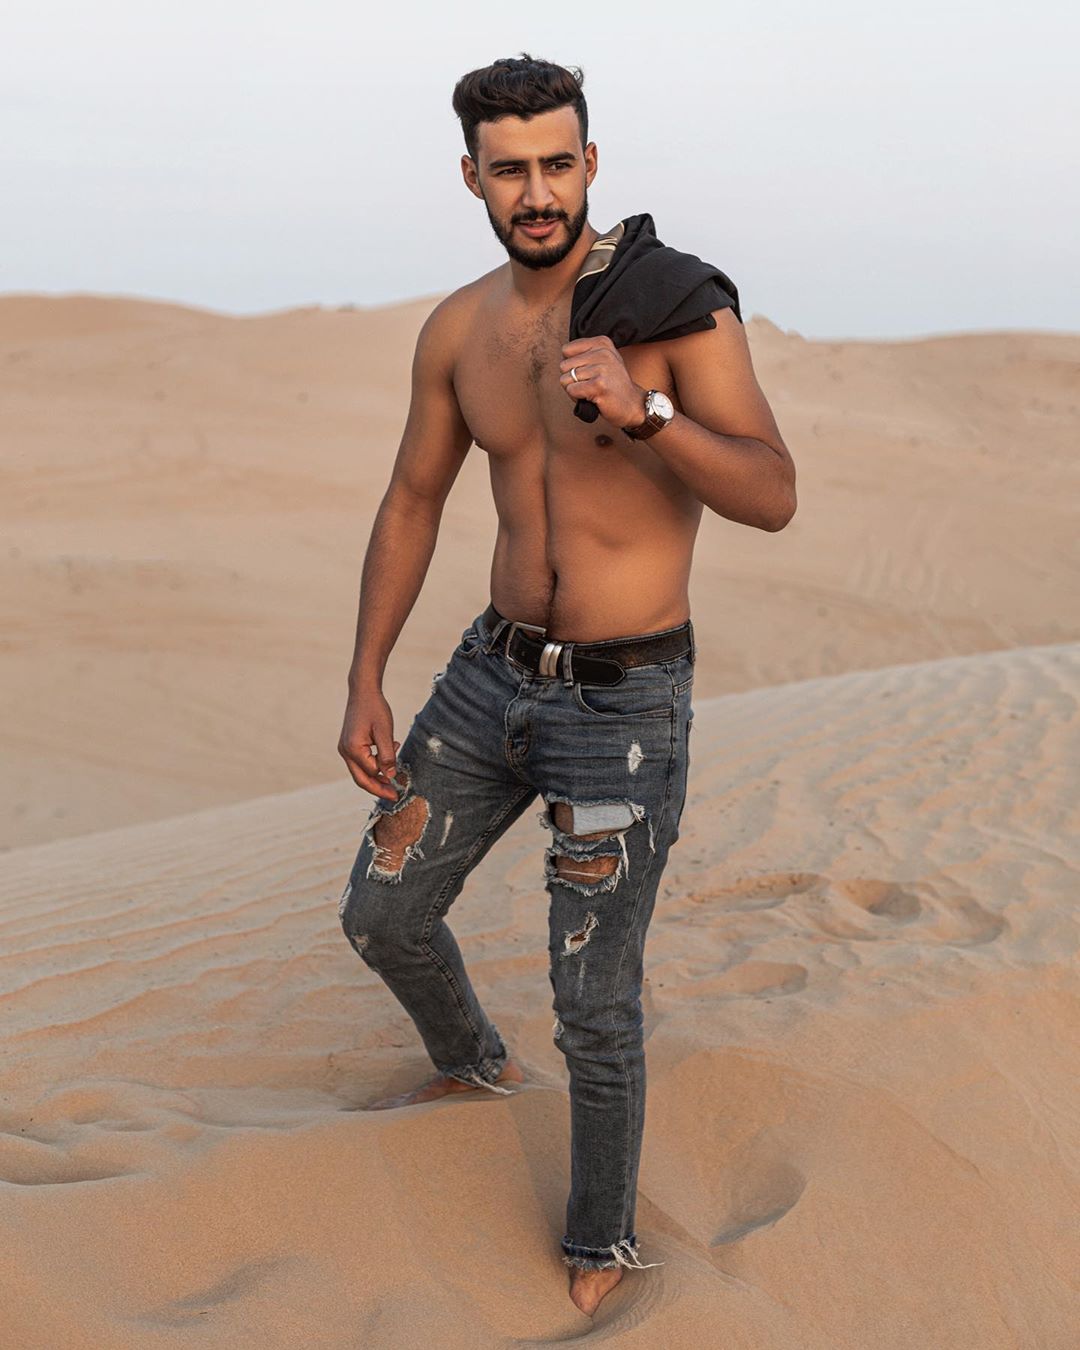 Capture the beauty of Dubai's desert with our male photographer. Book now for stunning images and a memorable experience.